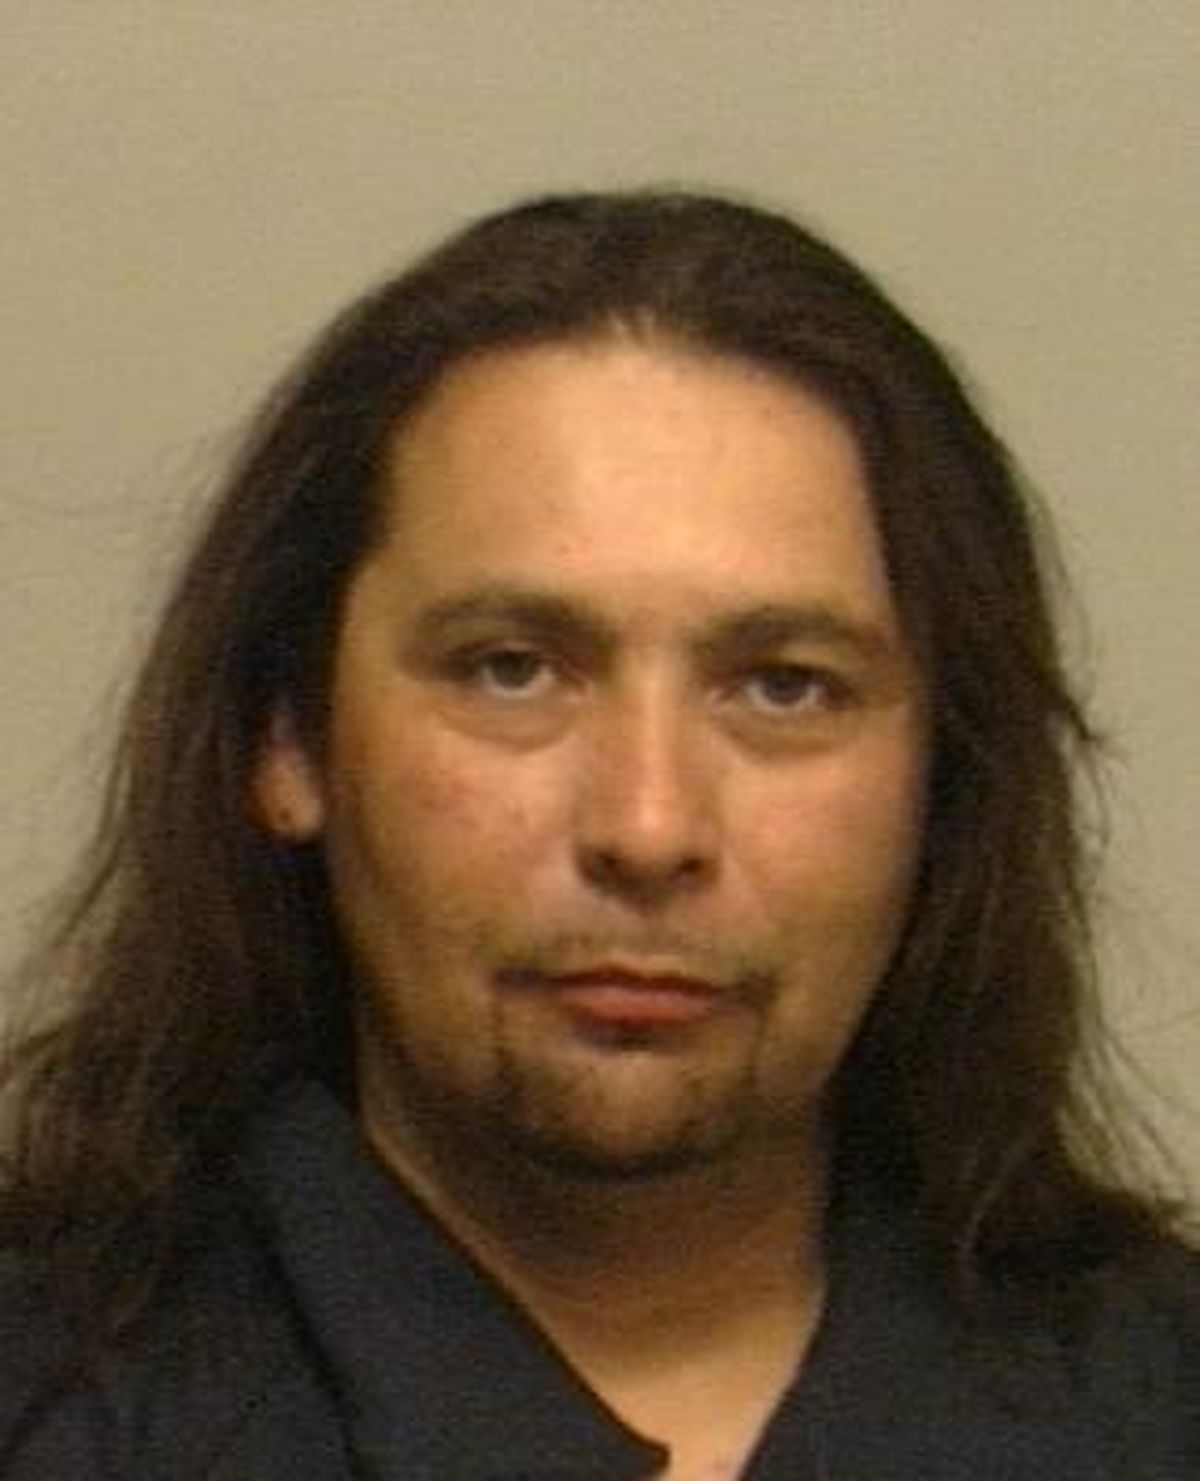 Clinton Joseph Bacon is a 42-year-old Native American male wanted for violating the terms of his probation on a drug conviction.  His 24-year local criminal history includes convictions for making false statements, drug possession, forgery, unlawful possession of a payment instrument, riot, possession of stolen property, assault, driving on a suspended license, reckless driving, DUI, burglary, vehicle prowling, possession of a dangerous weapon, obstructing a police investigation, vehicle theft and probation violations. He is 5’09” tall, weighs 210 pounds and has brown hair and green eyes.  His last known address was 211 S. Regal in Spokane.  (Crime Stoppers)